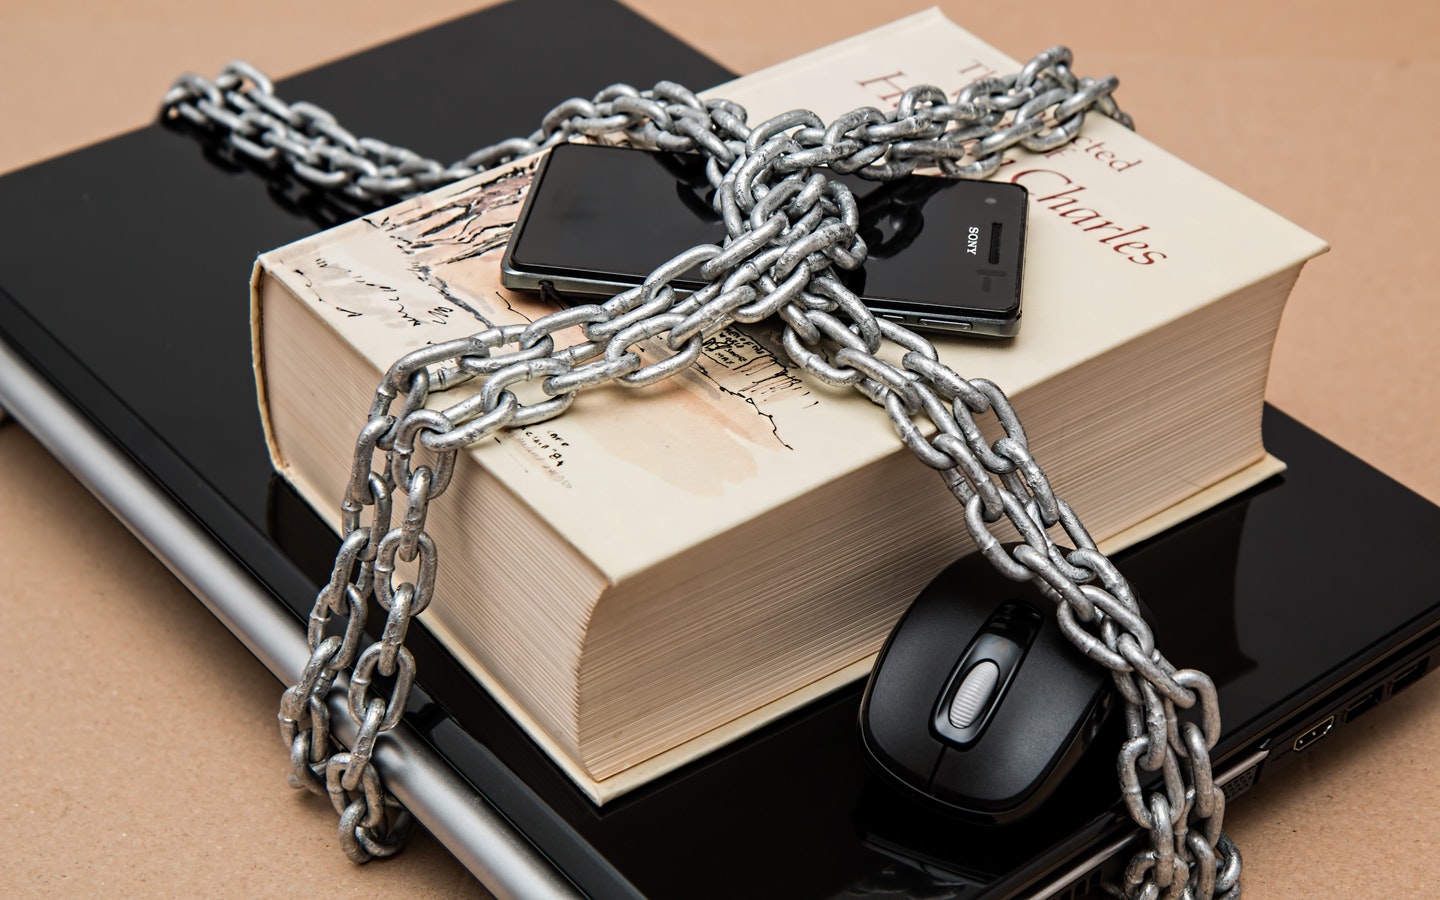 A laptop, book, smartphone, and a mice is chained on a table